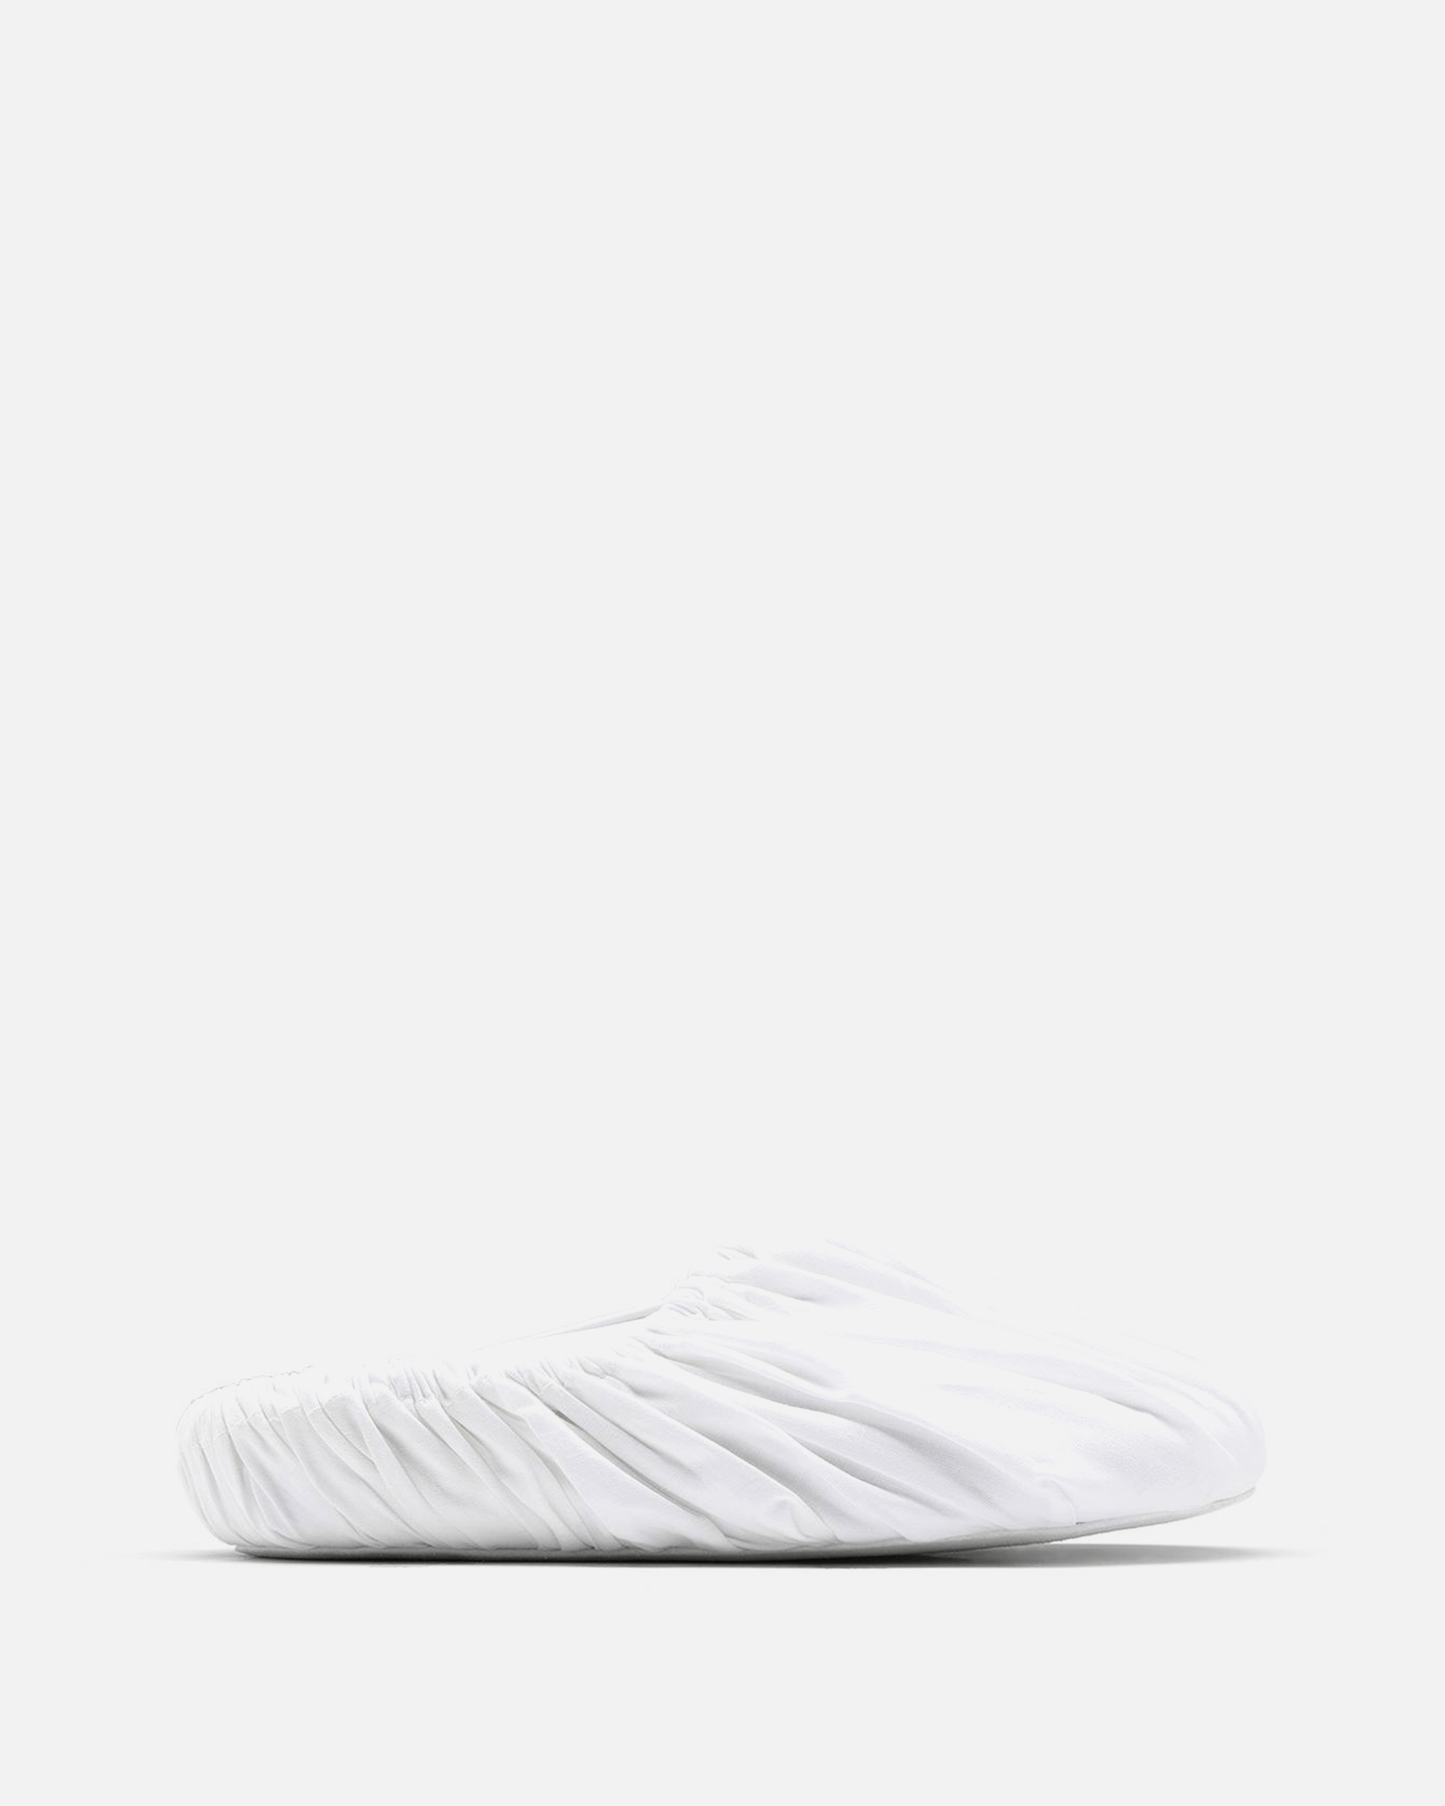 Maison Margiela Men's Shoes Covered Cotton Slip-On Shoes in White